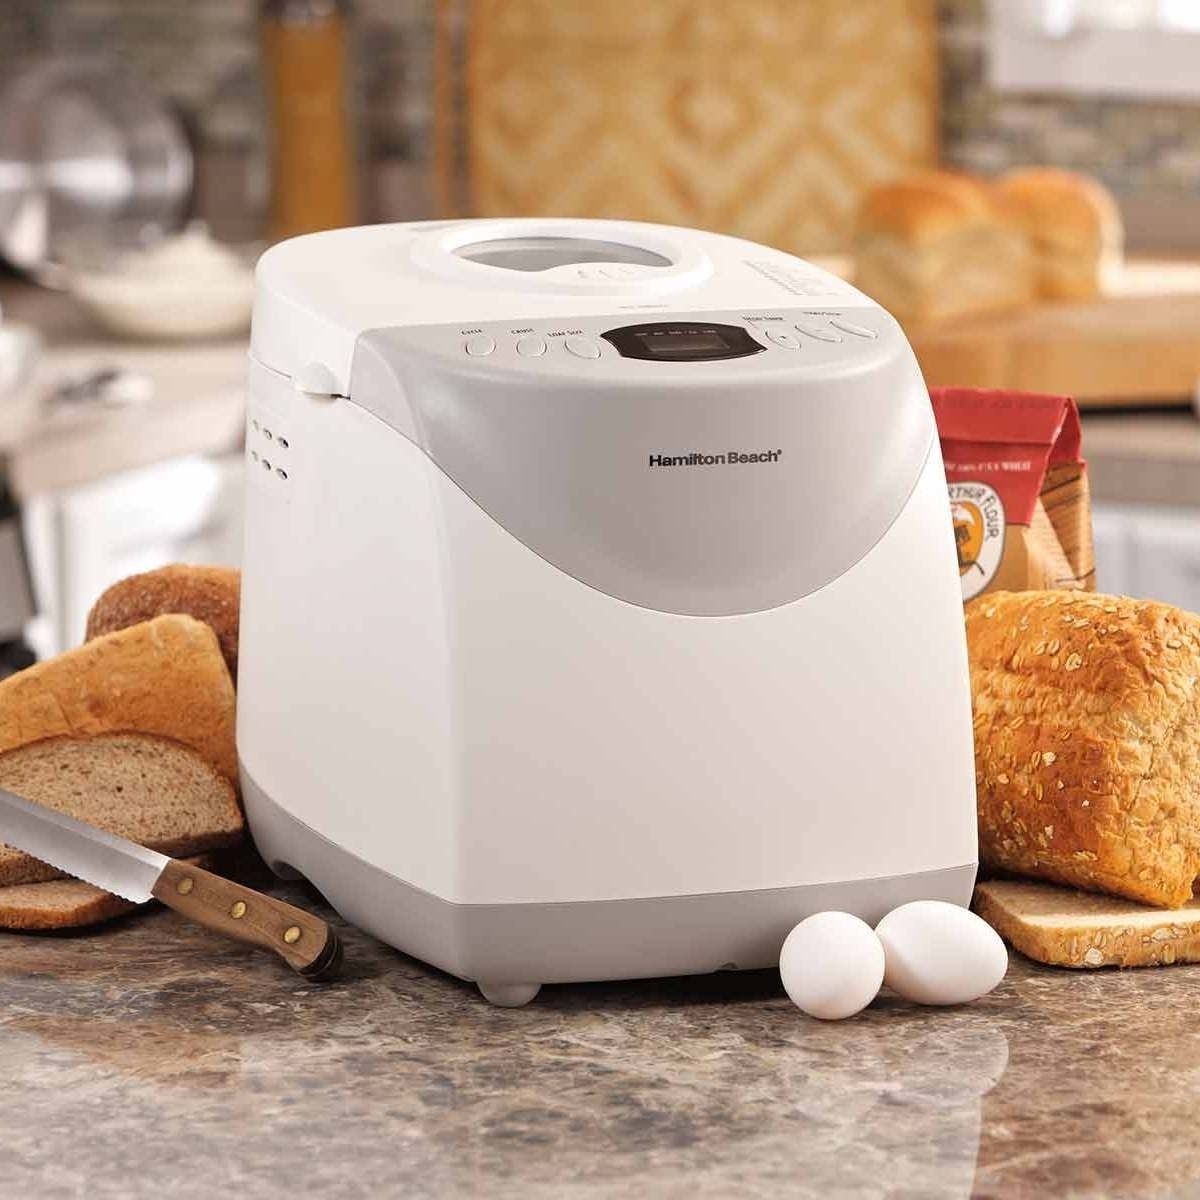 The bread maker surrounded by delicious loaves